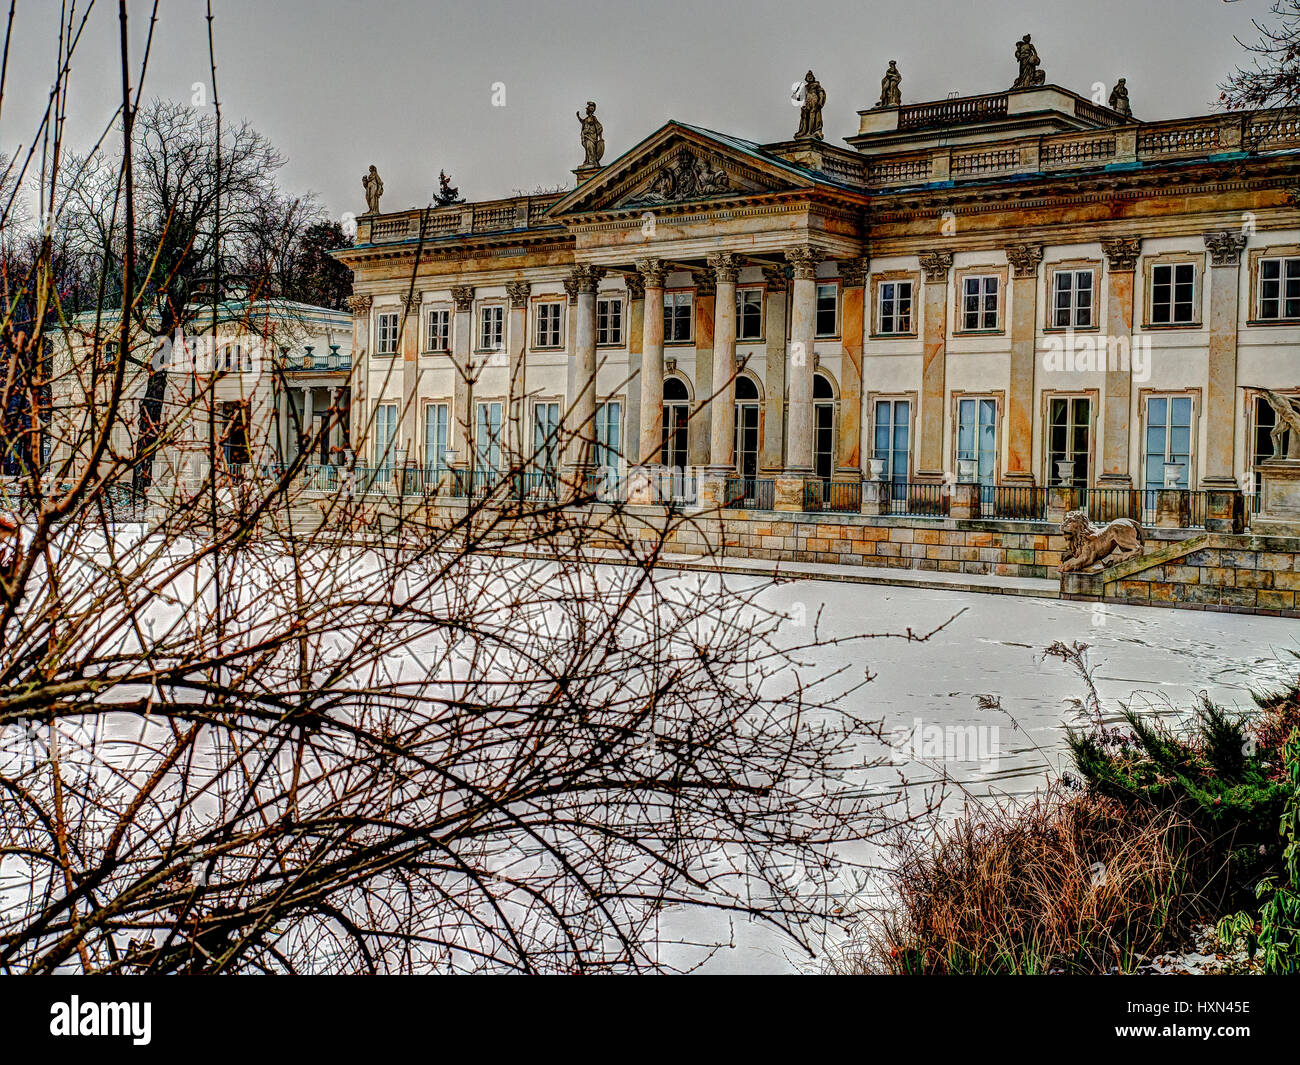 Warsaw, Poland - January 01, 2016: A View of the “Palace on the Water” in the Royal “Lazienki” park during  hard frosts in winter Stock Photo